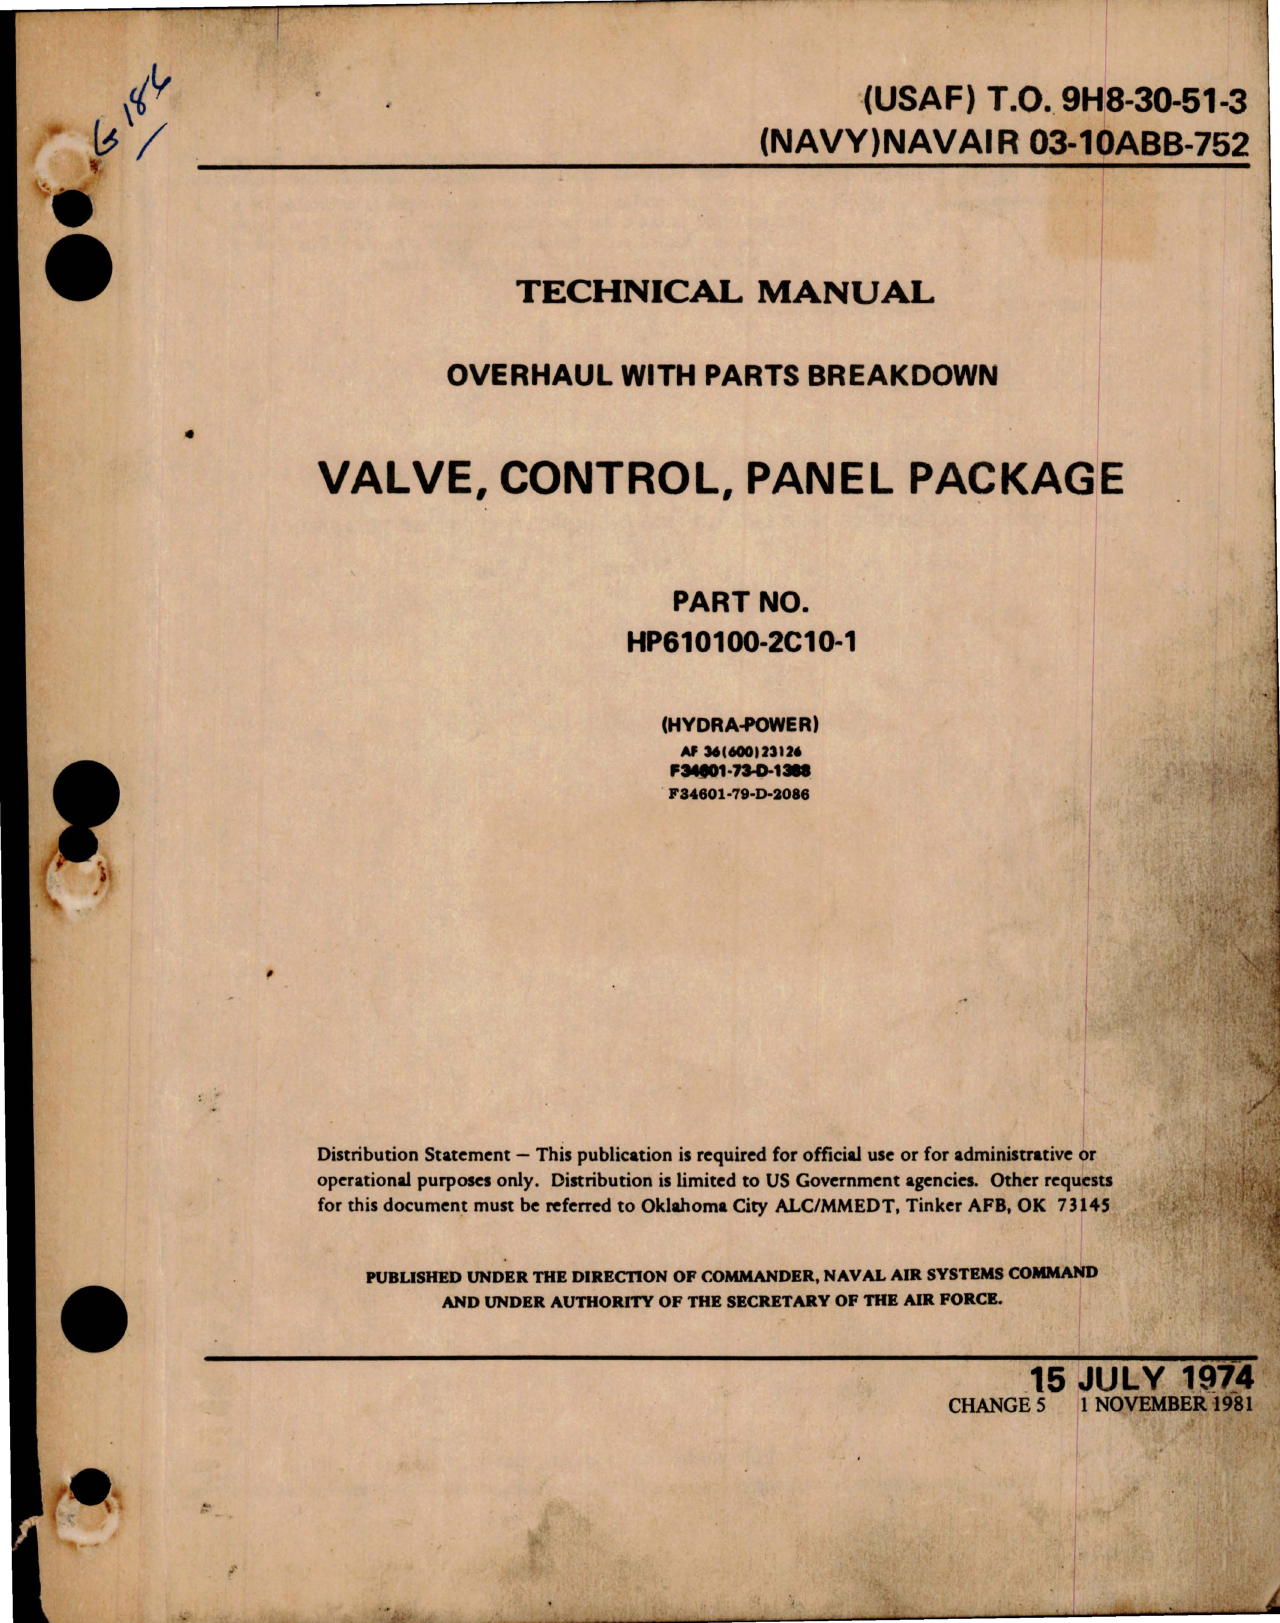 Sample page 1 from AirCorps Library document: Overhaul with Parts Breakdown for Valve Control Panel Package - Part HP610100-2C10-1